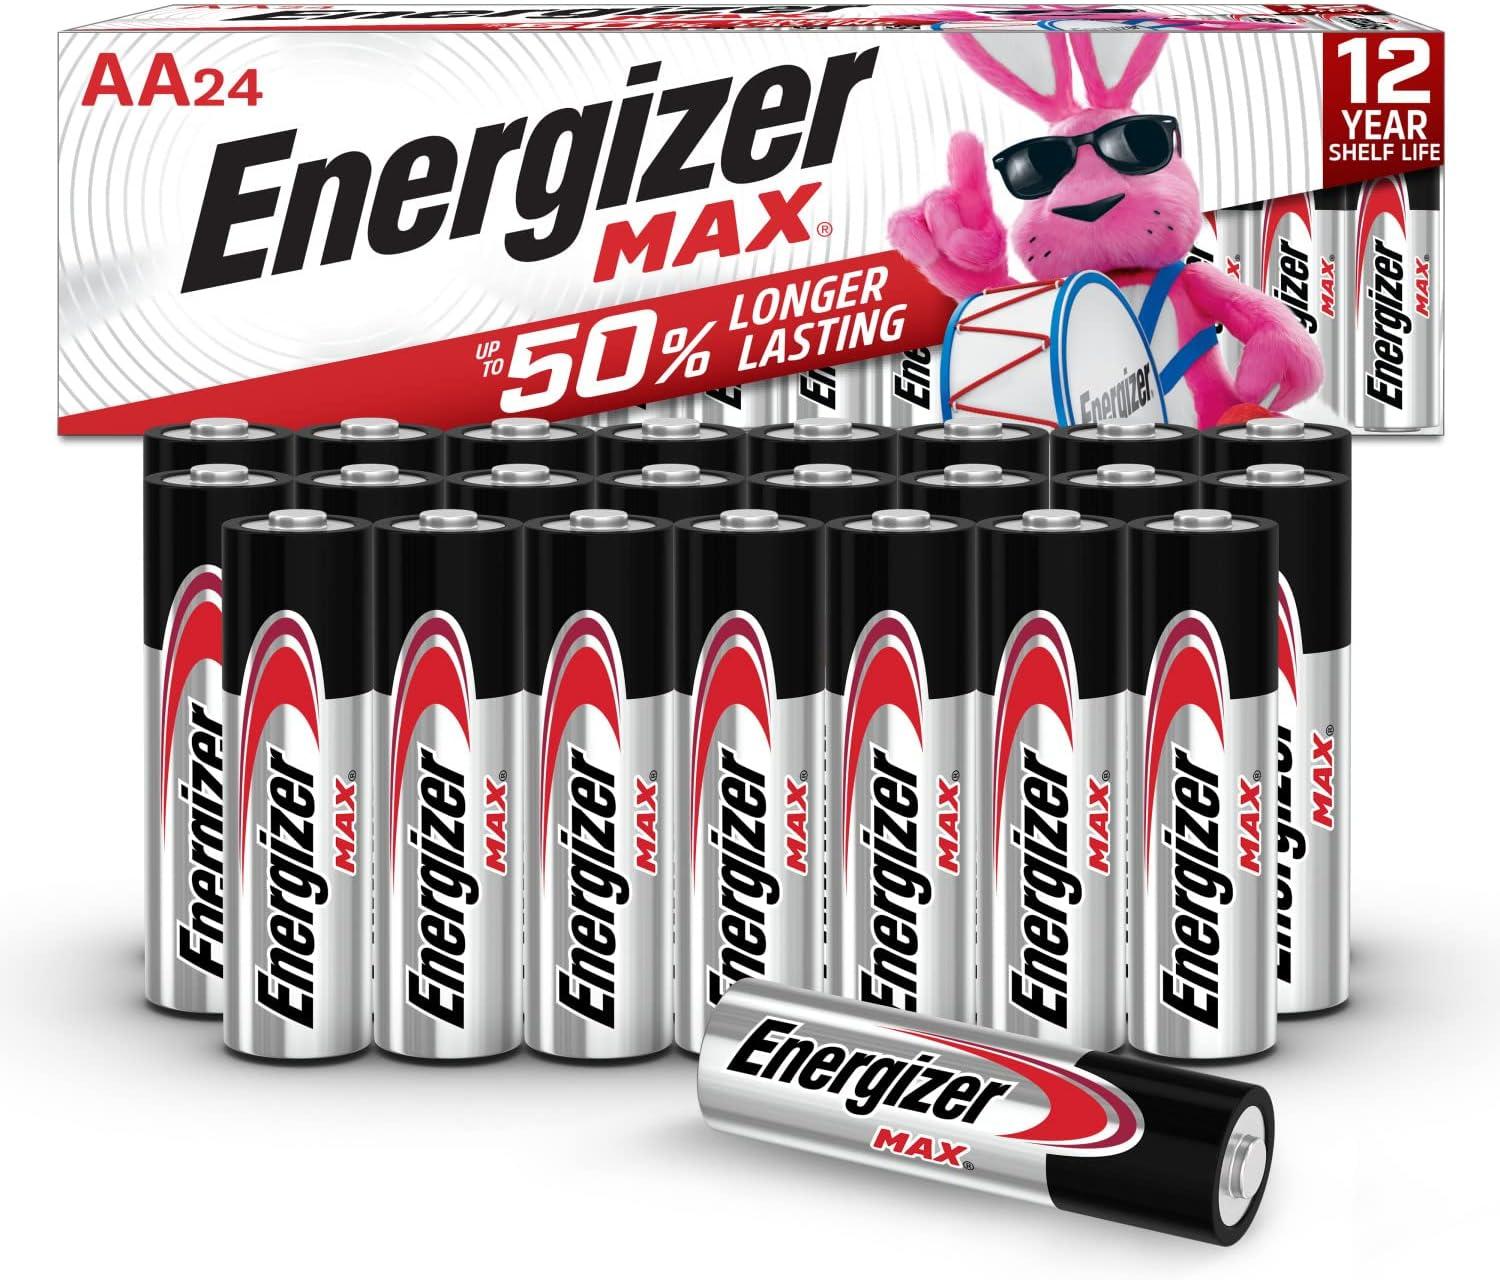 Energizer Max AA Alkaline Batteries 24 Pack for $13.26